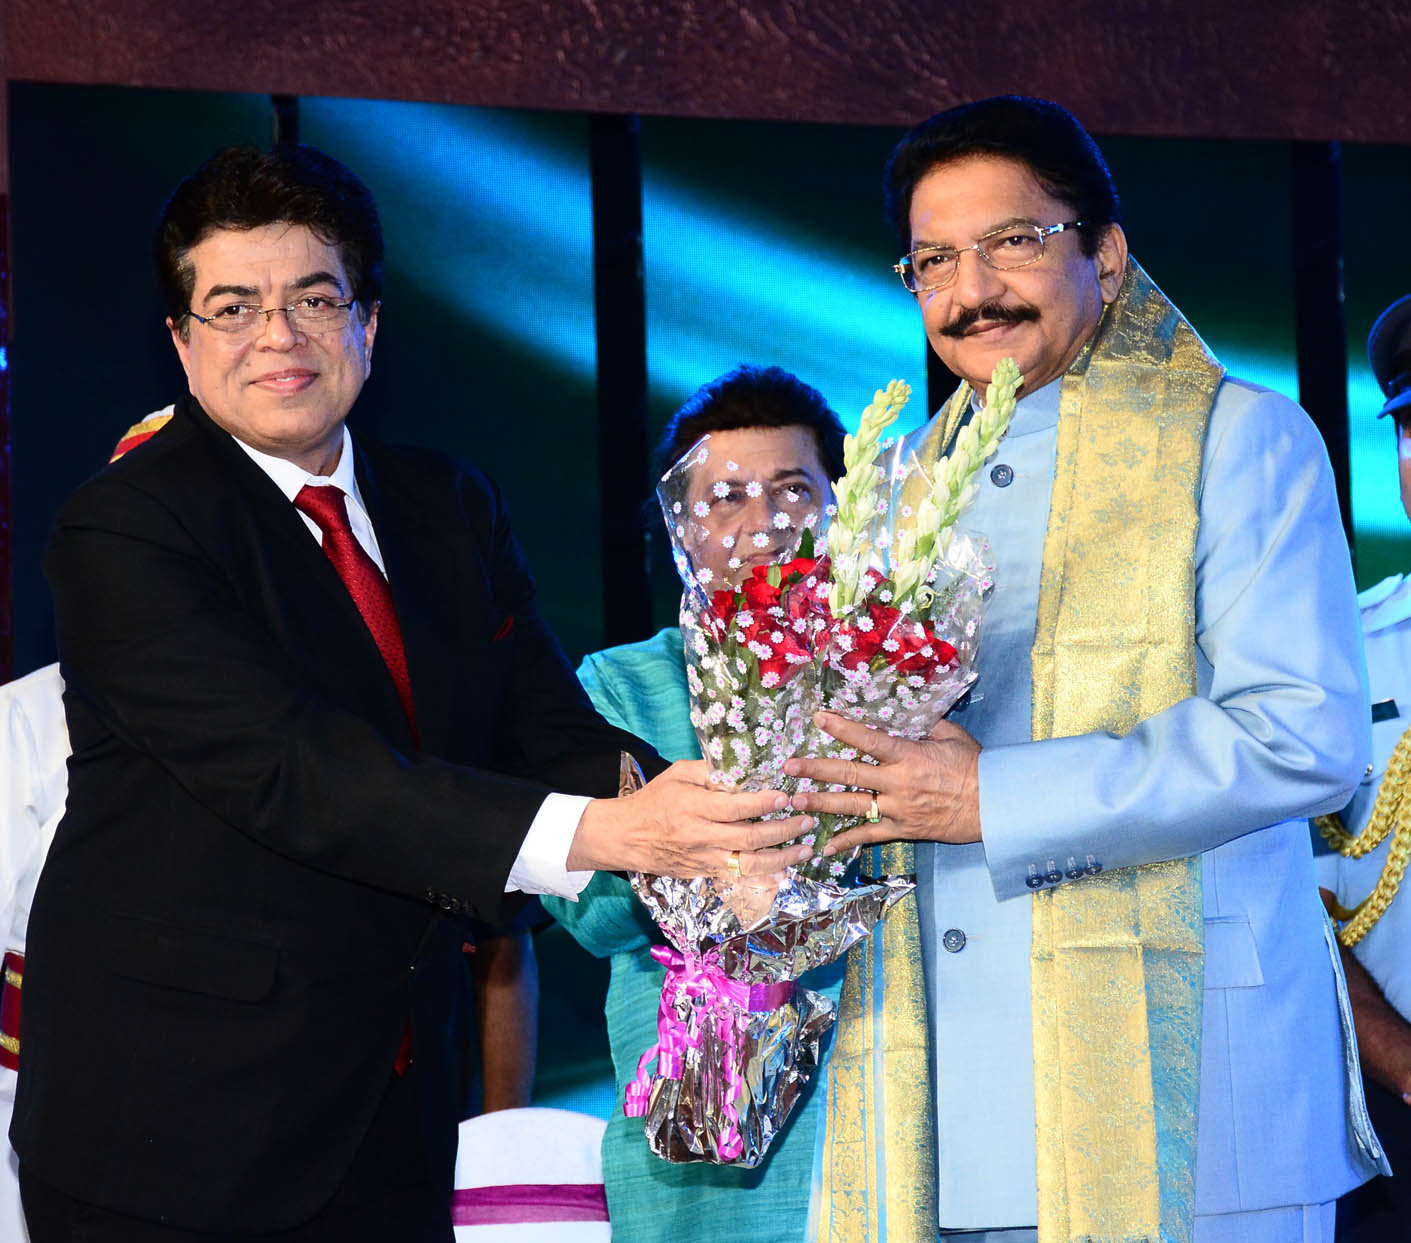 With the Hon'ble Governor of Maharashtra at the DD awards